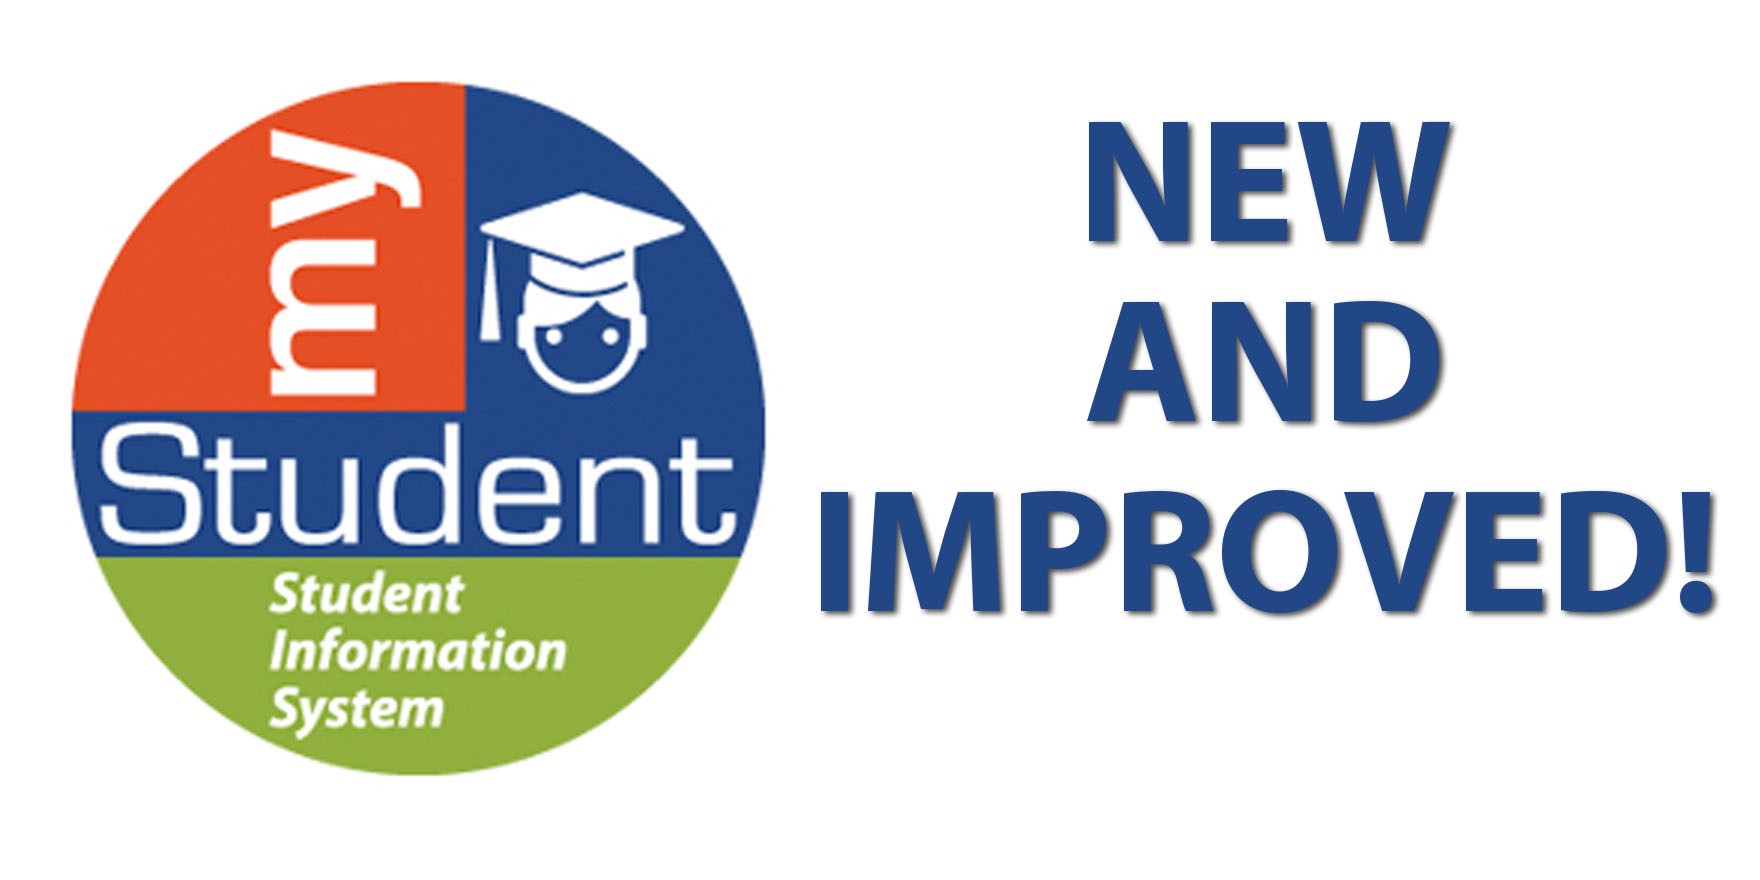 new and improved - mystudent, student information system